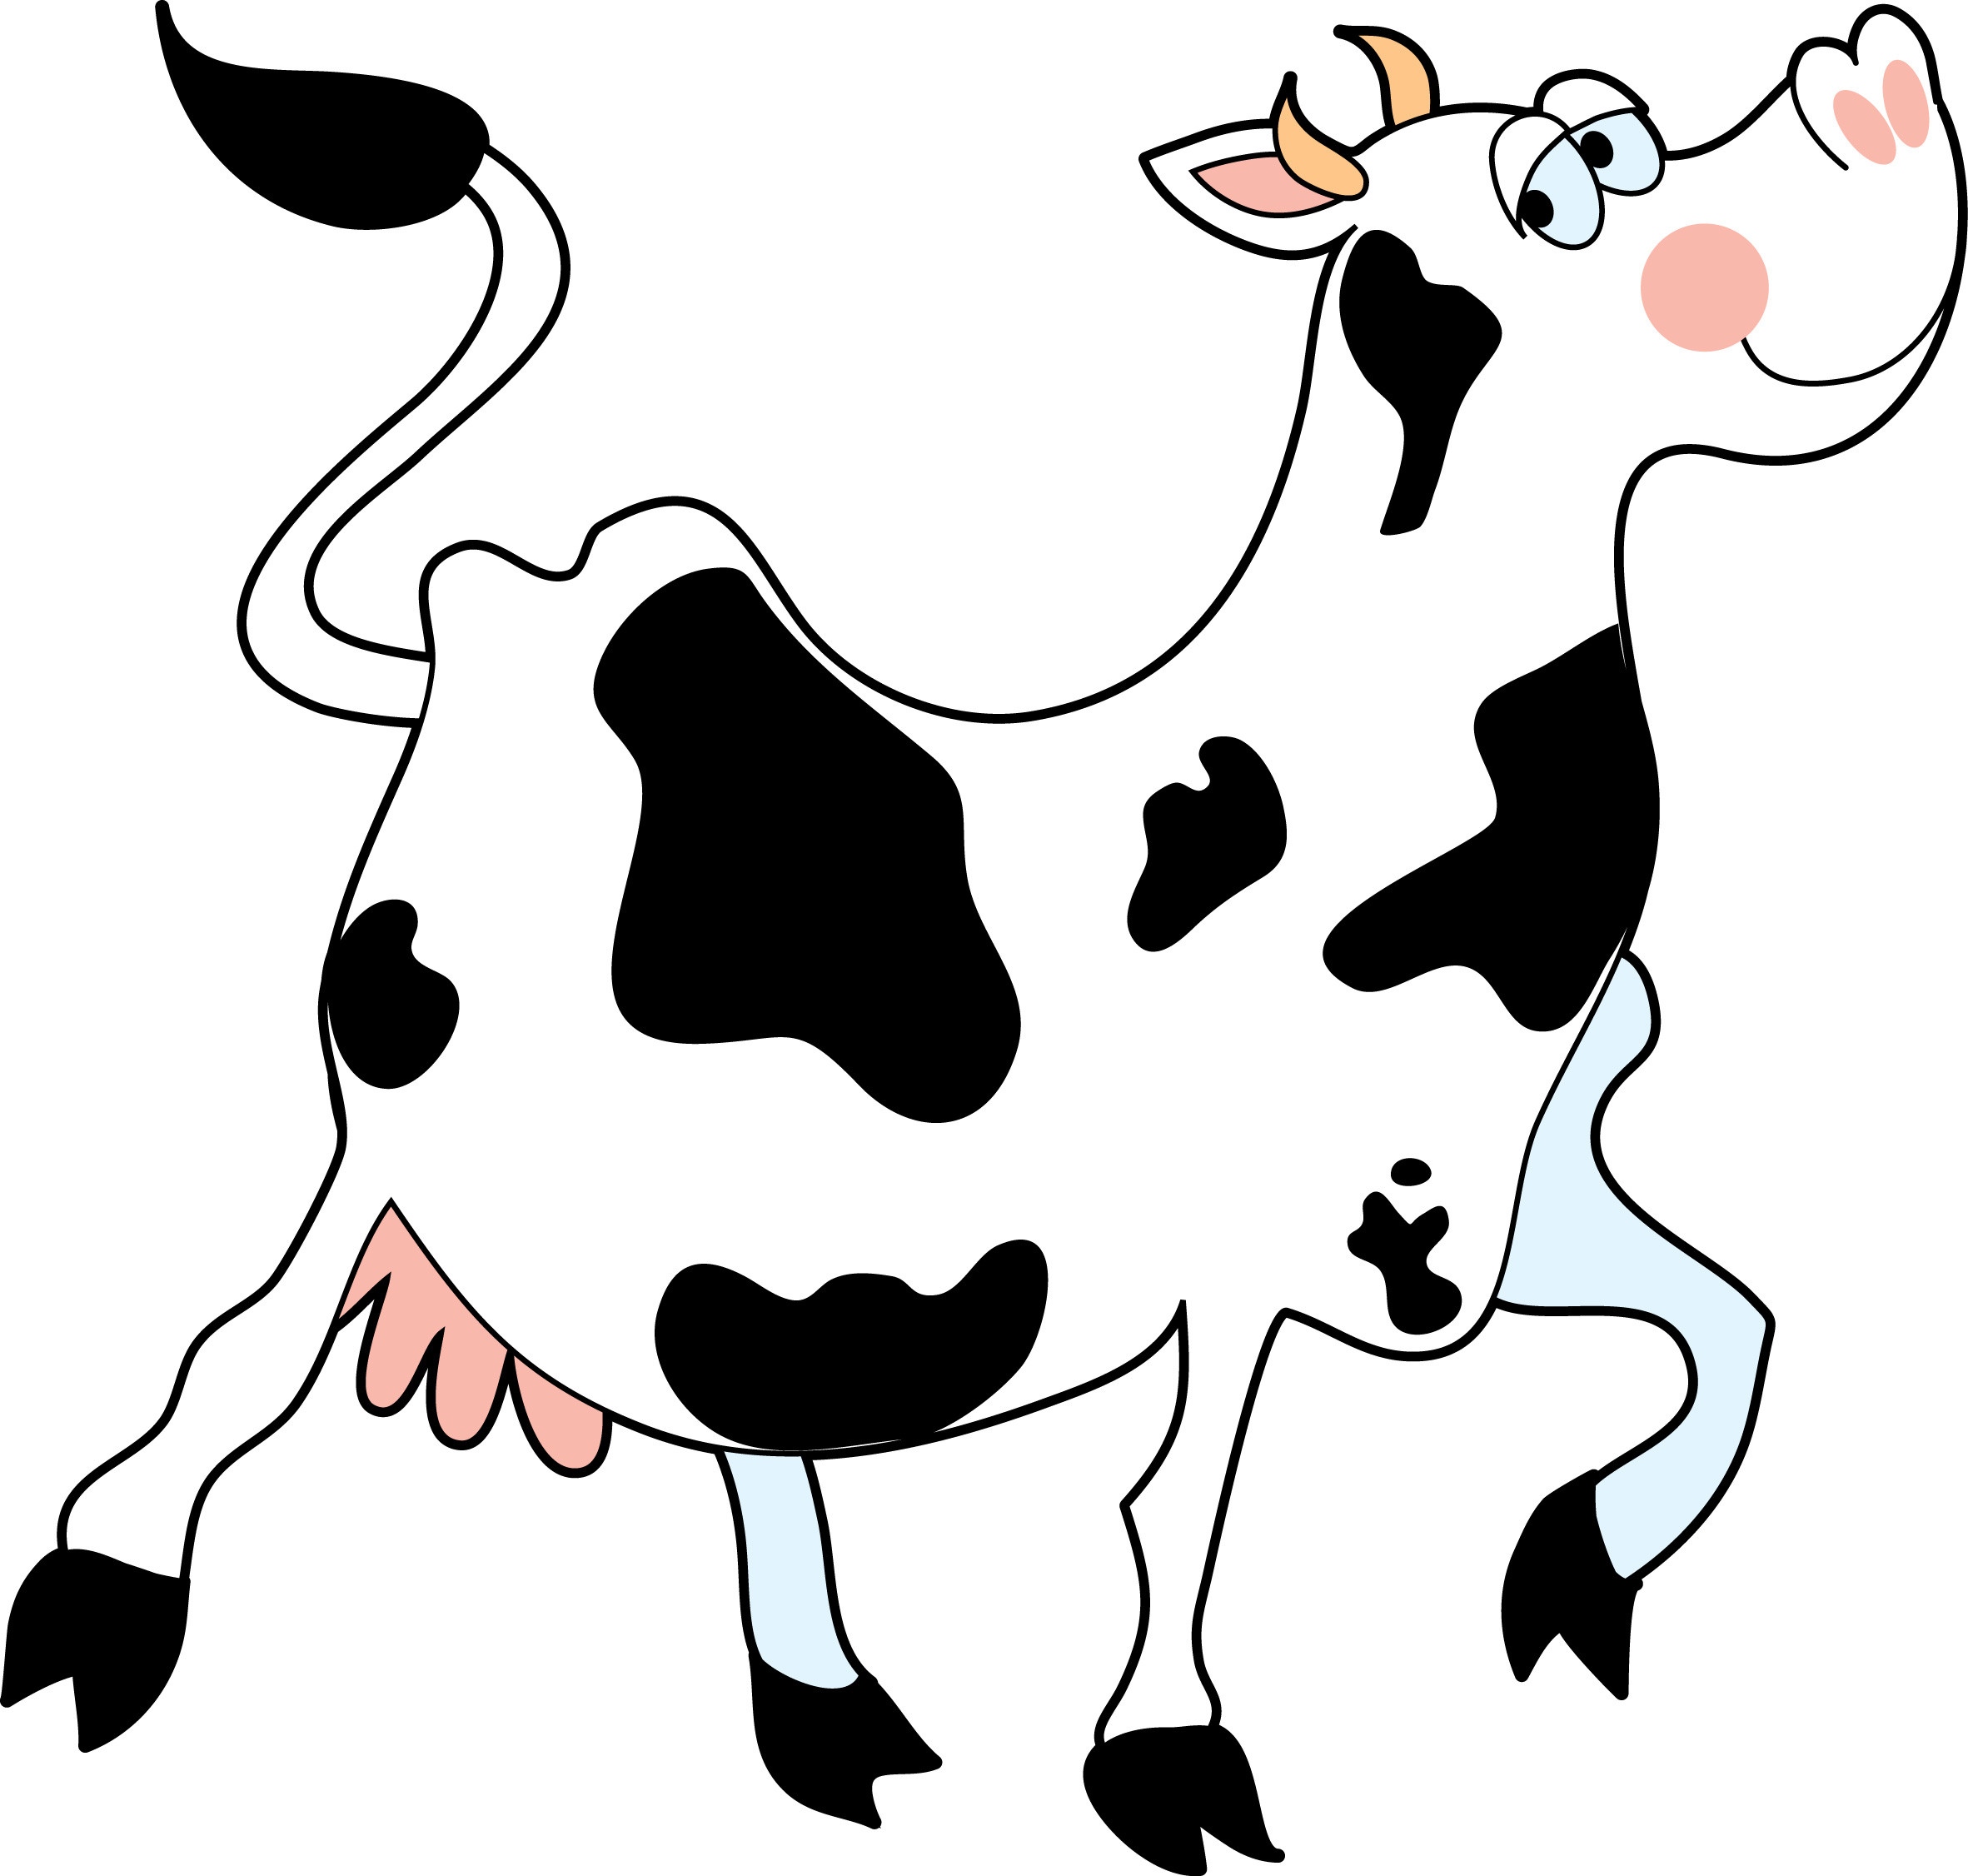 Free animated cow.